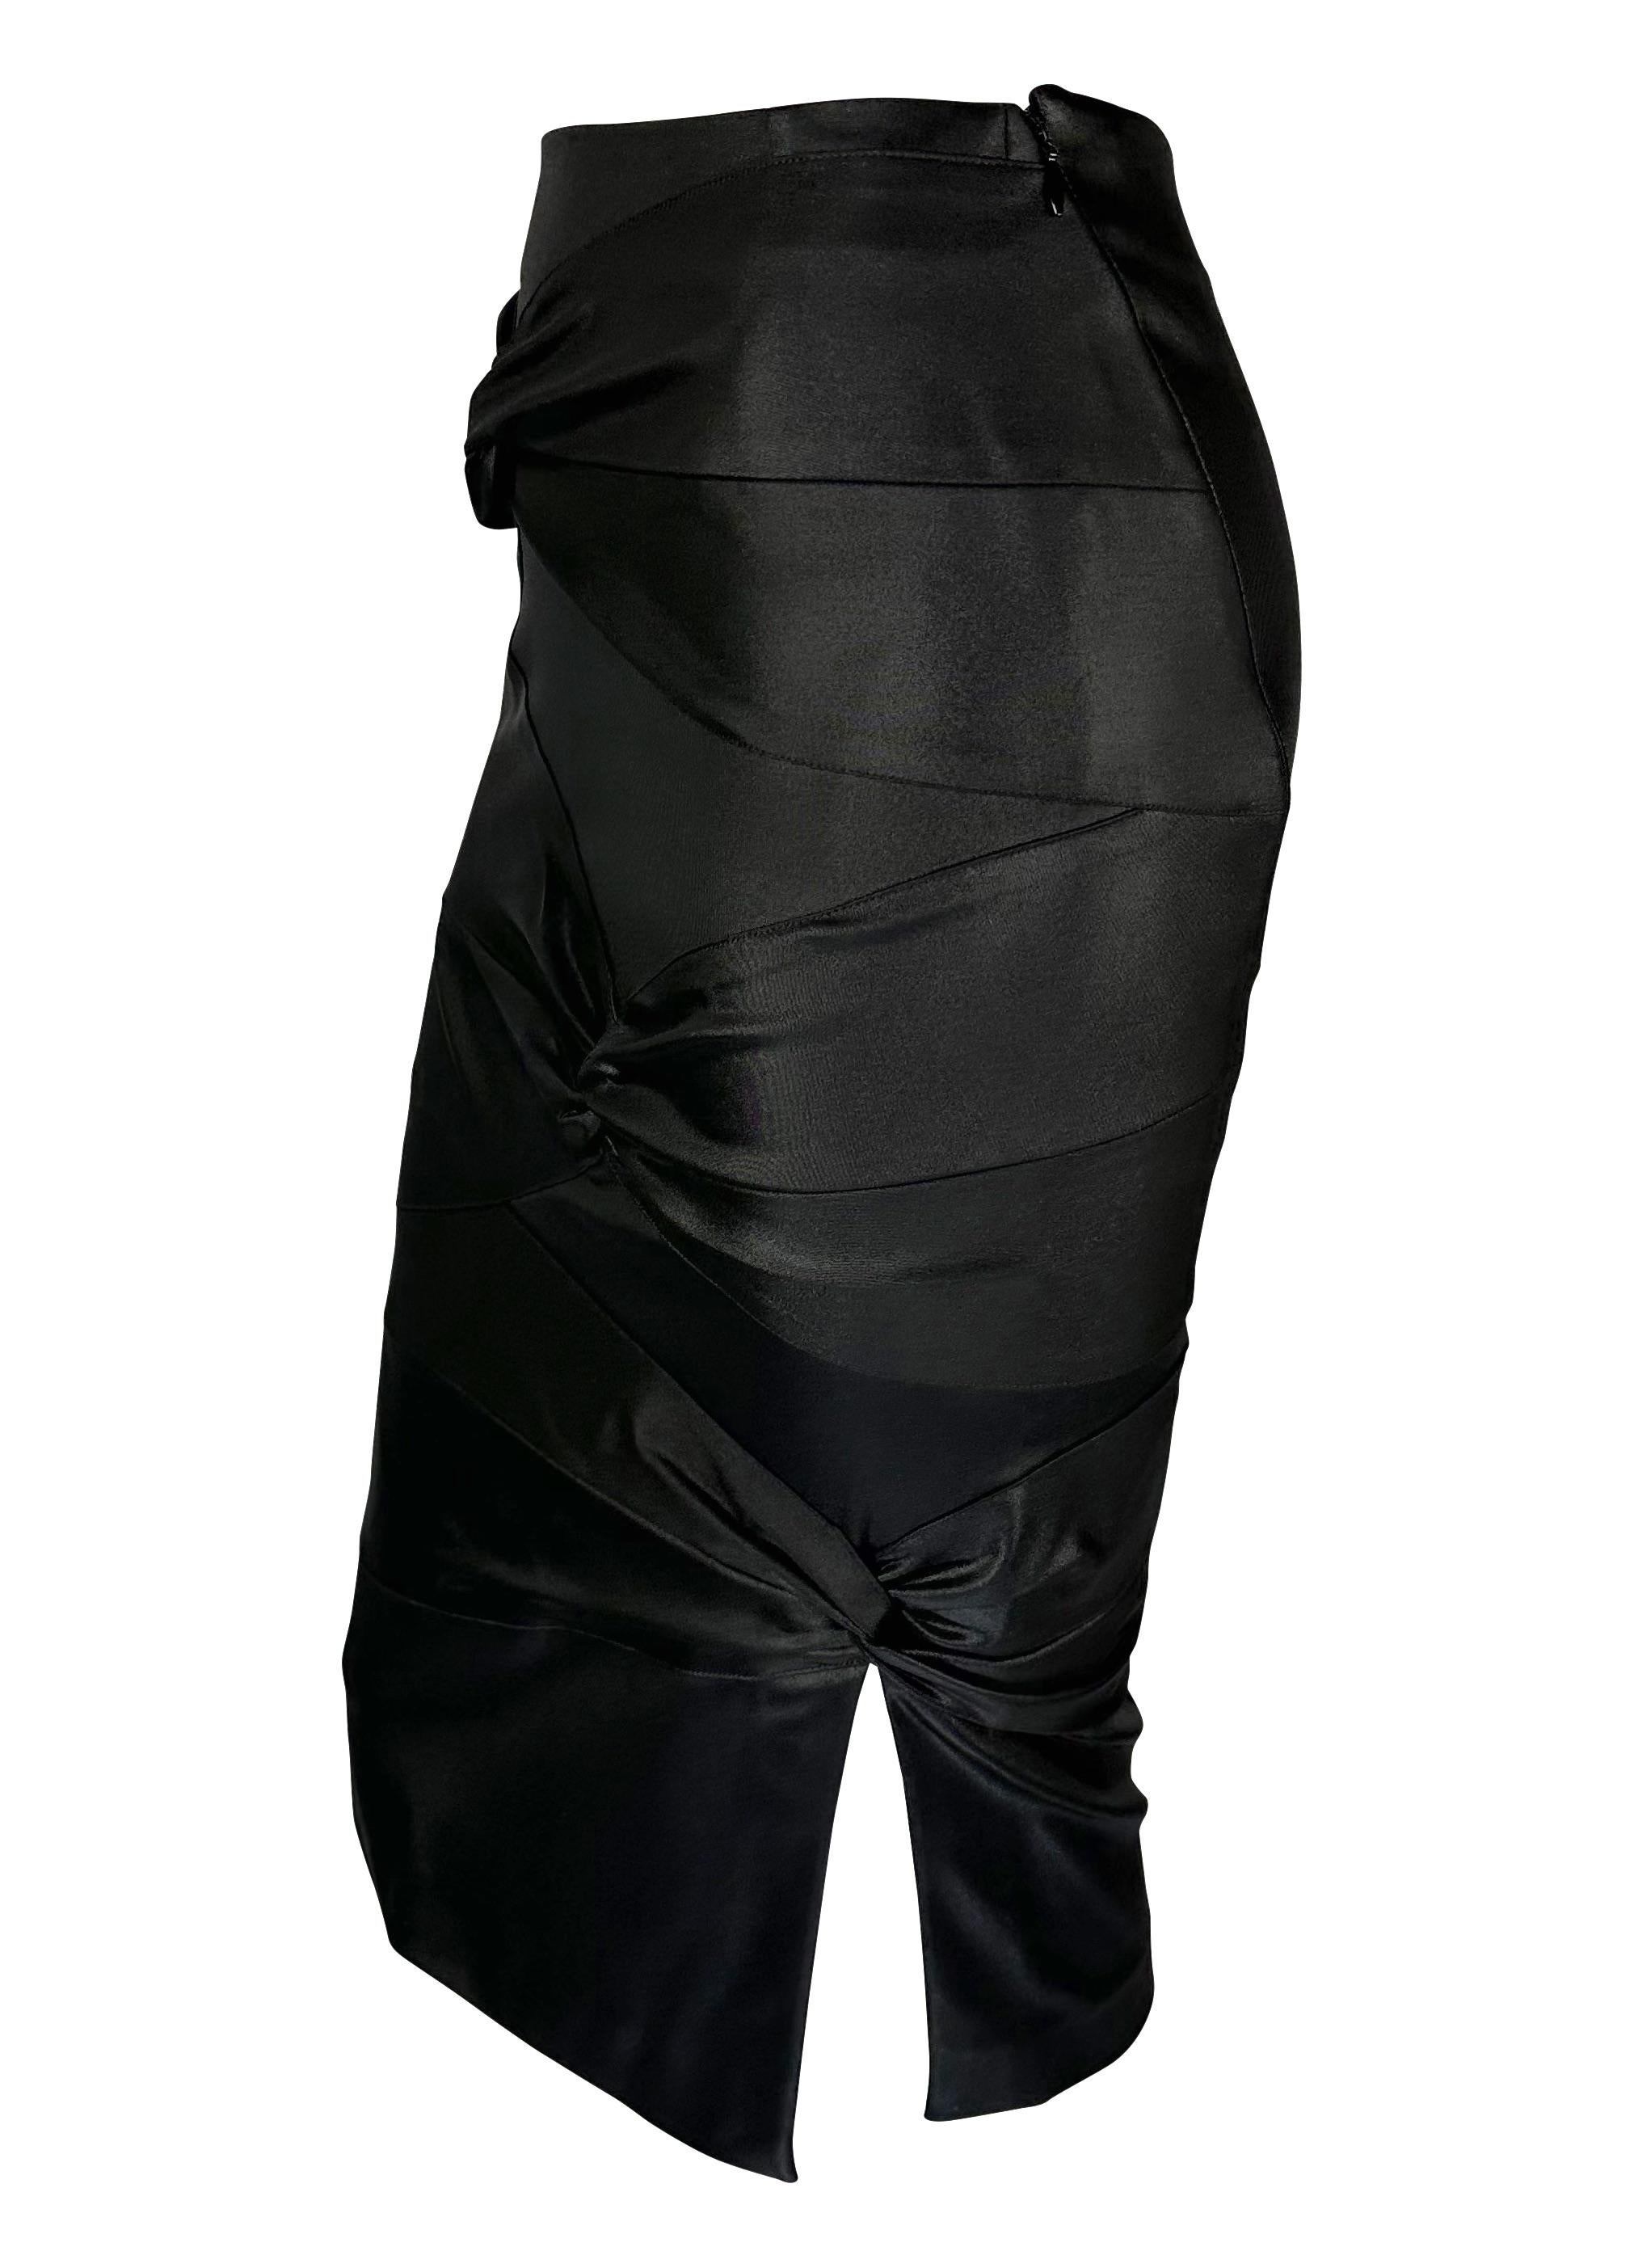 F/W 2003 Christian Dior by John Galliano Tie Accent Bodycon Stretch Skirt In Excellent Condition For Sale In West Hollywood, CA